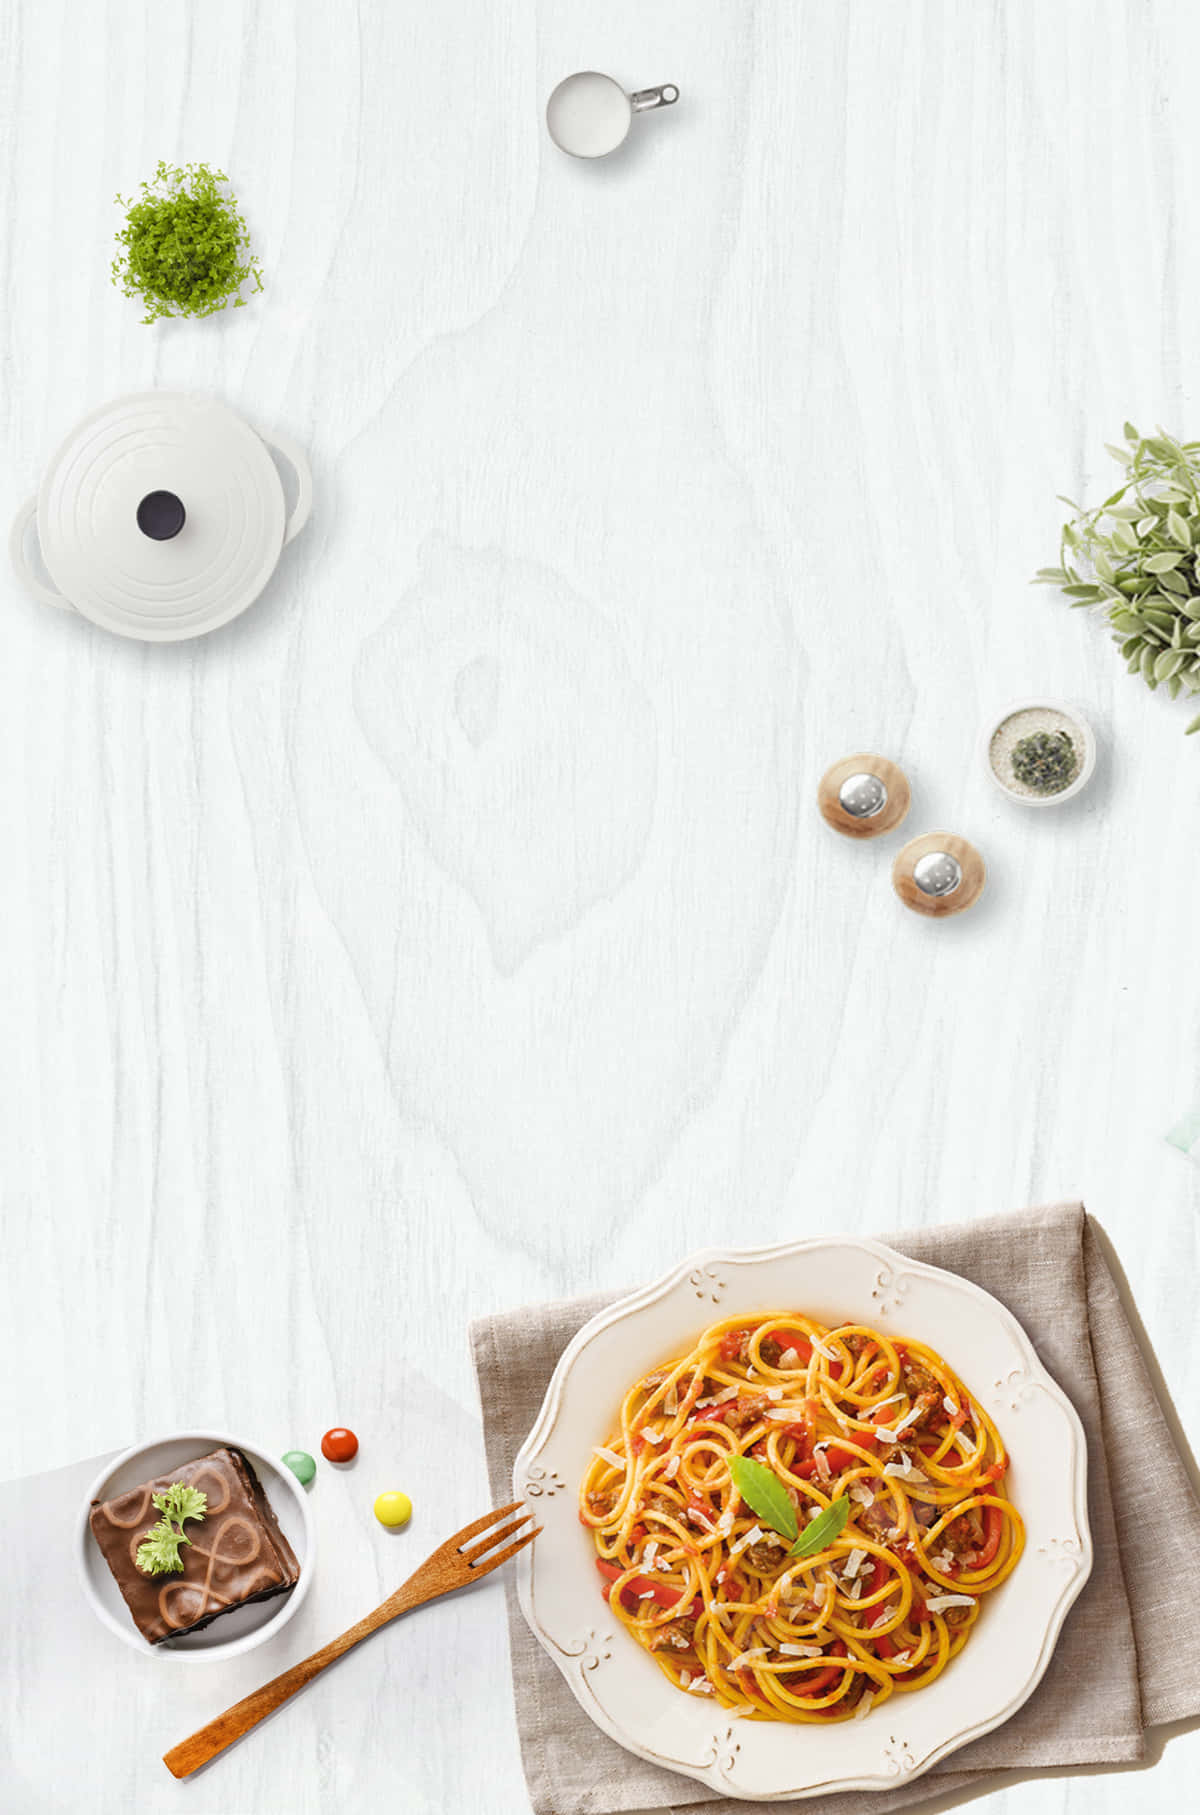 A Plate Of Spaghetti With Meat And Vegetables Wallpaper